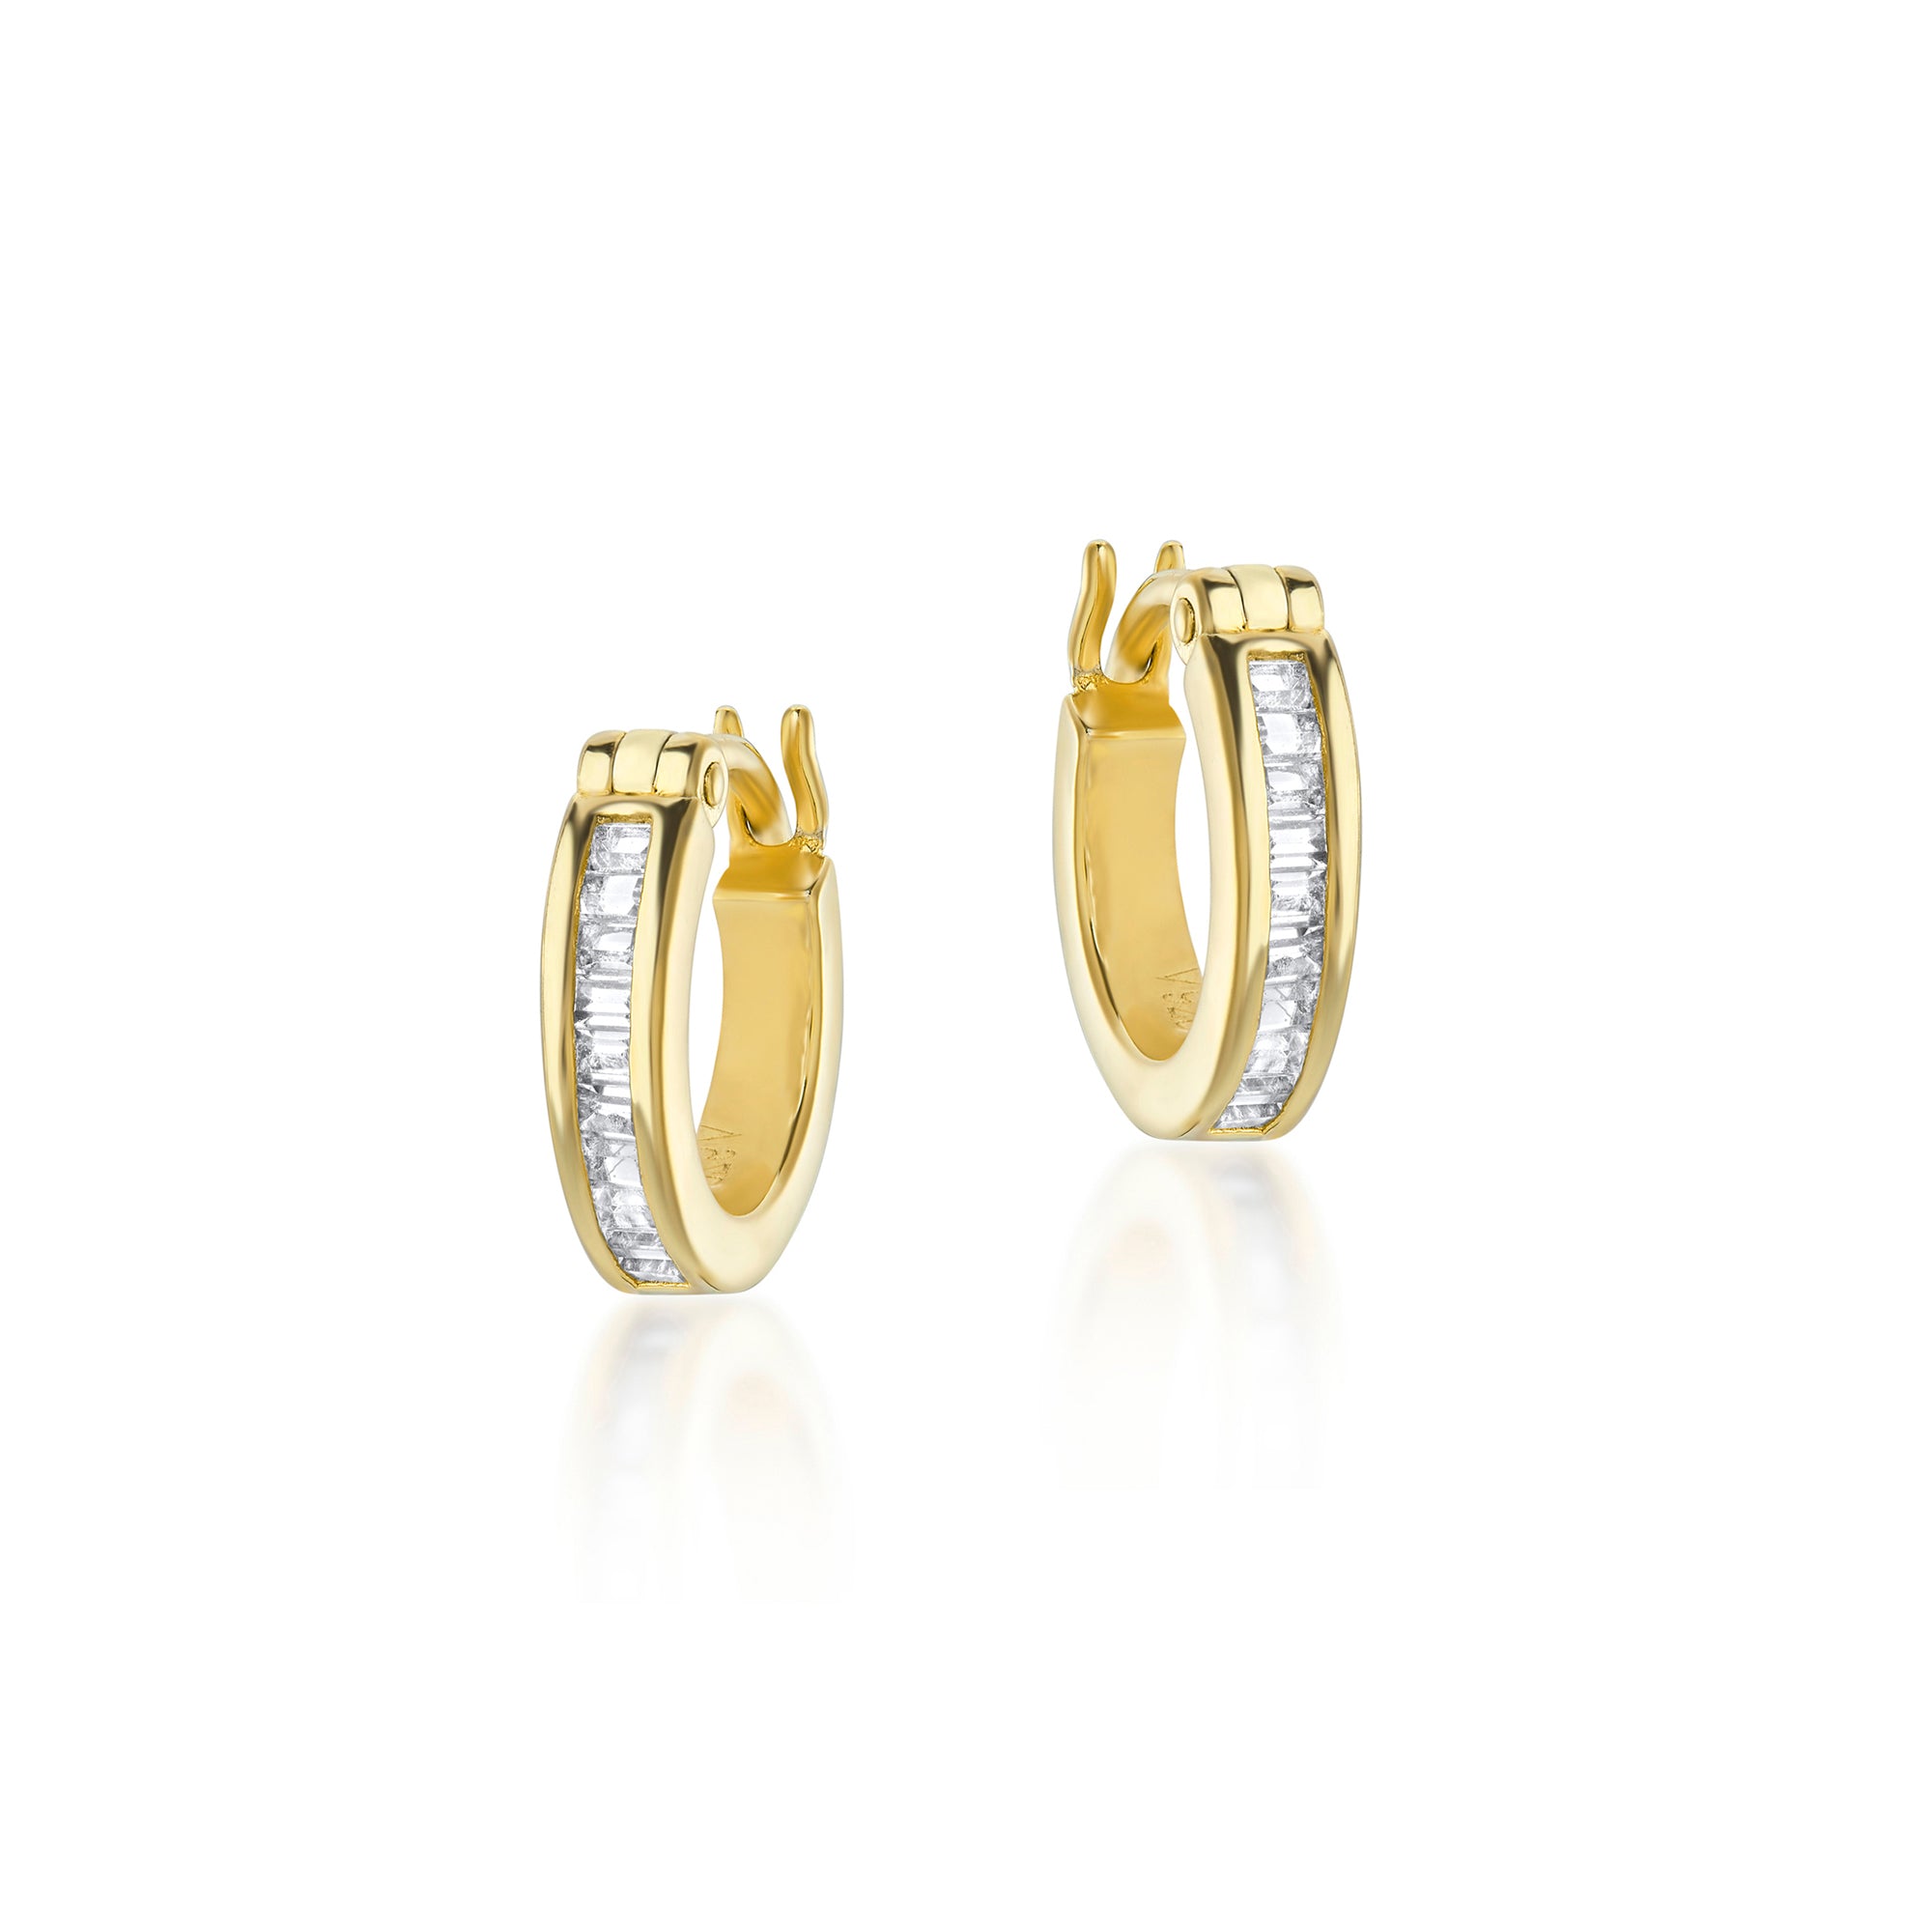 Phoebe Gold Hoops with Square Cut White Topaz